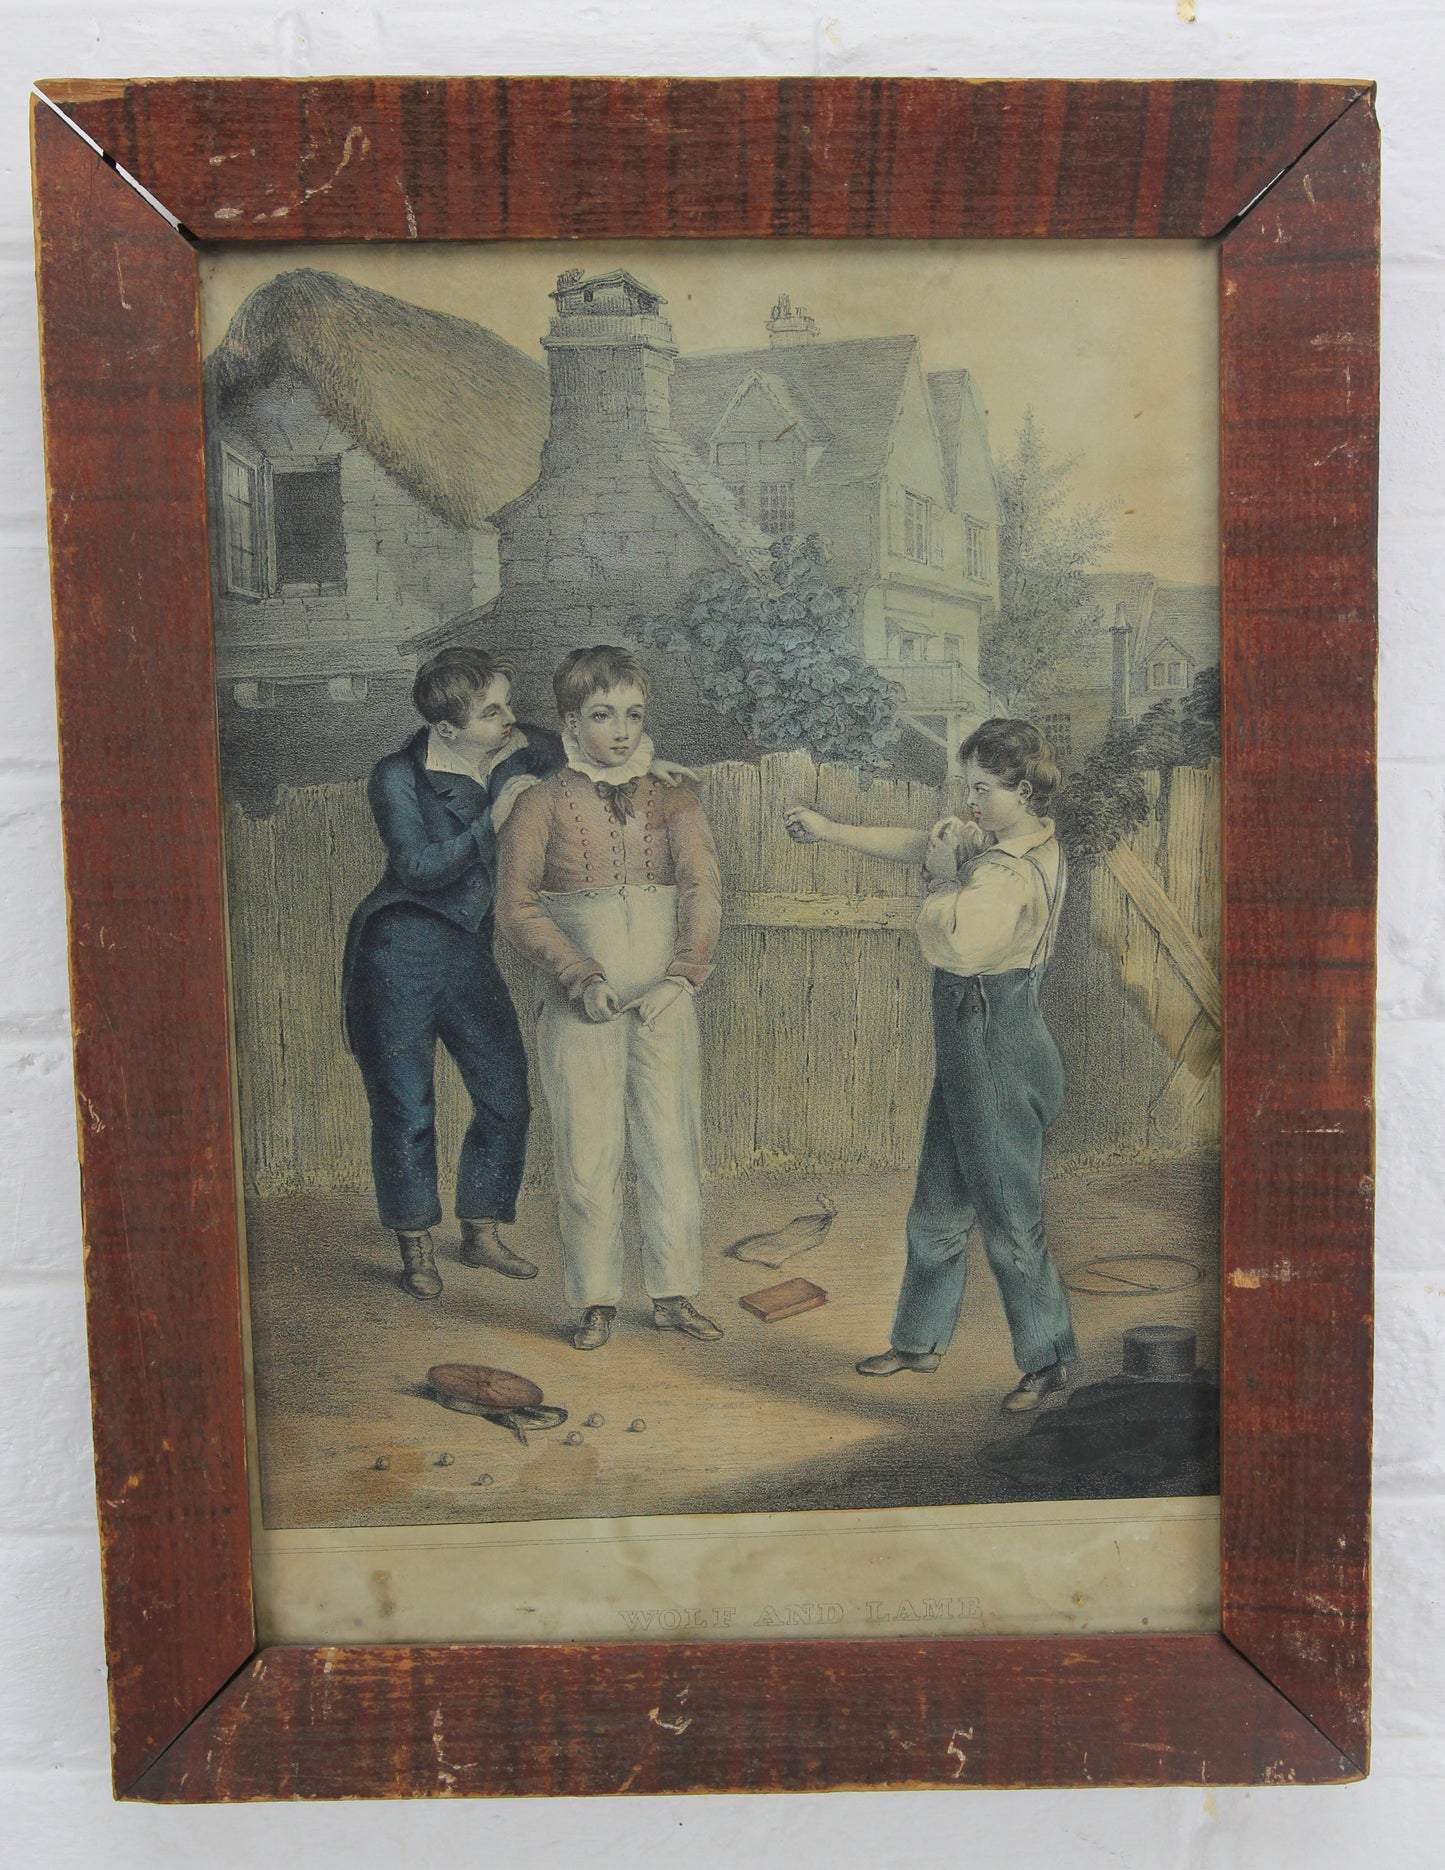 Antique Print of Boys Fighting Titled "Wolf and Lamb" - 12 x 16"